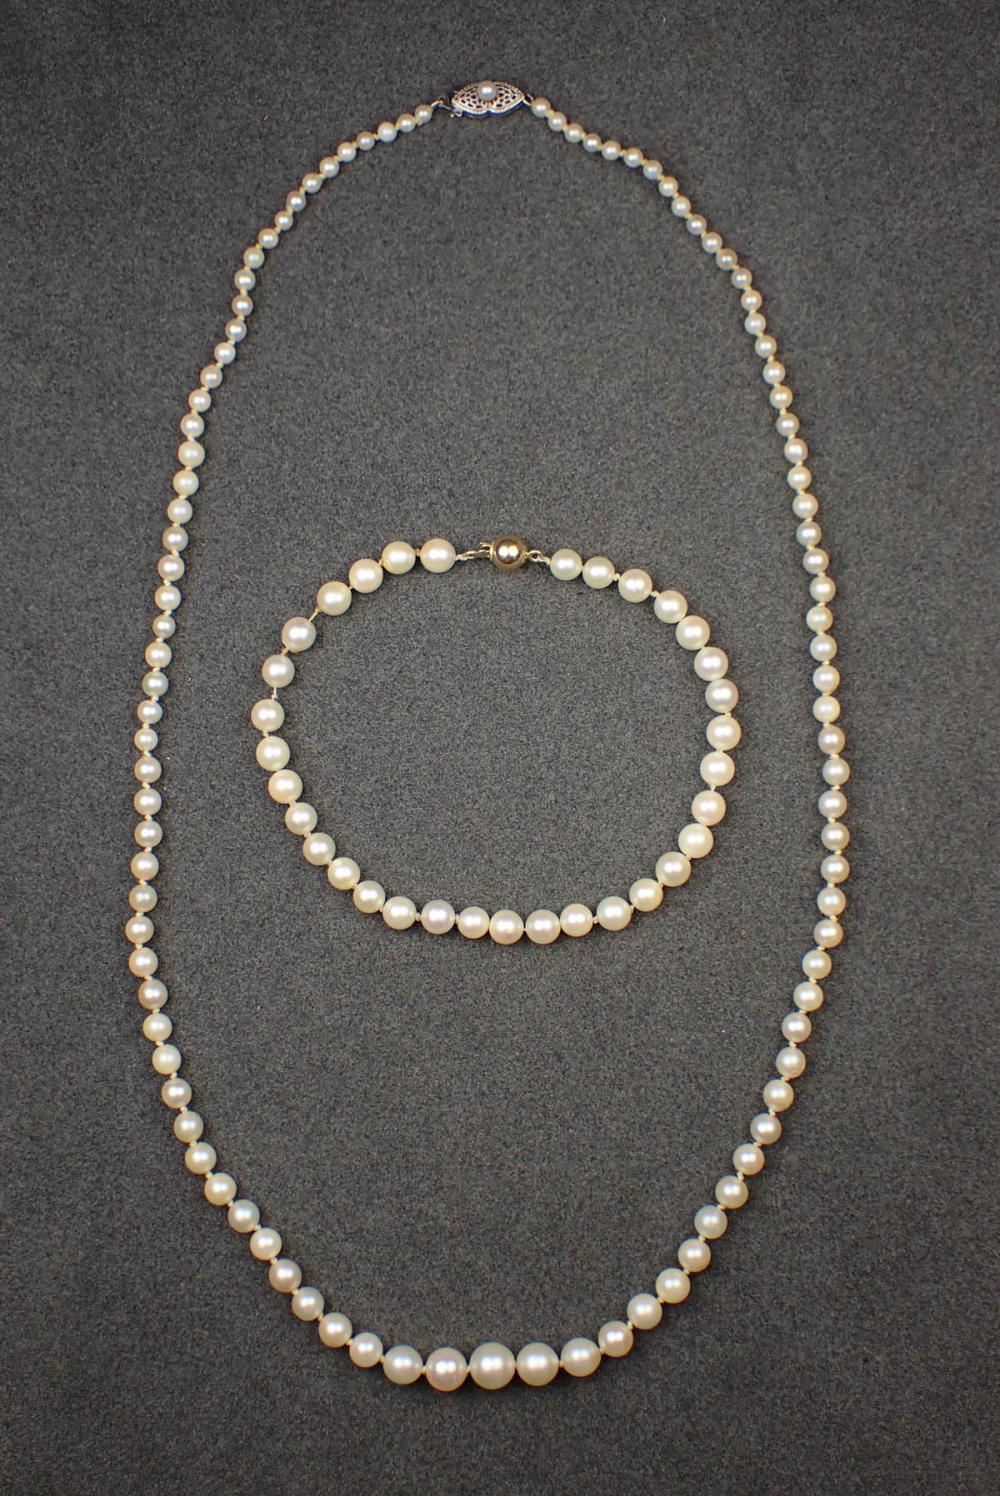 PEARL NECKLACE AND BRACELET WITH